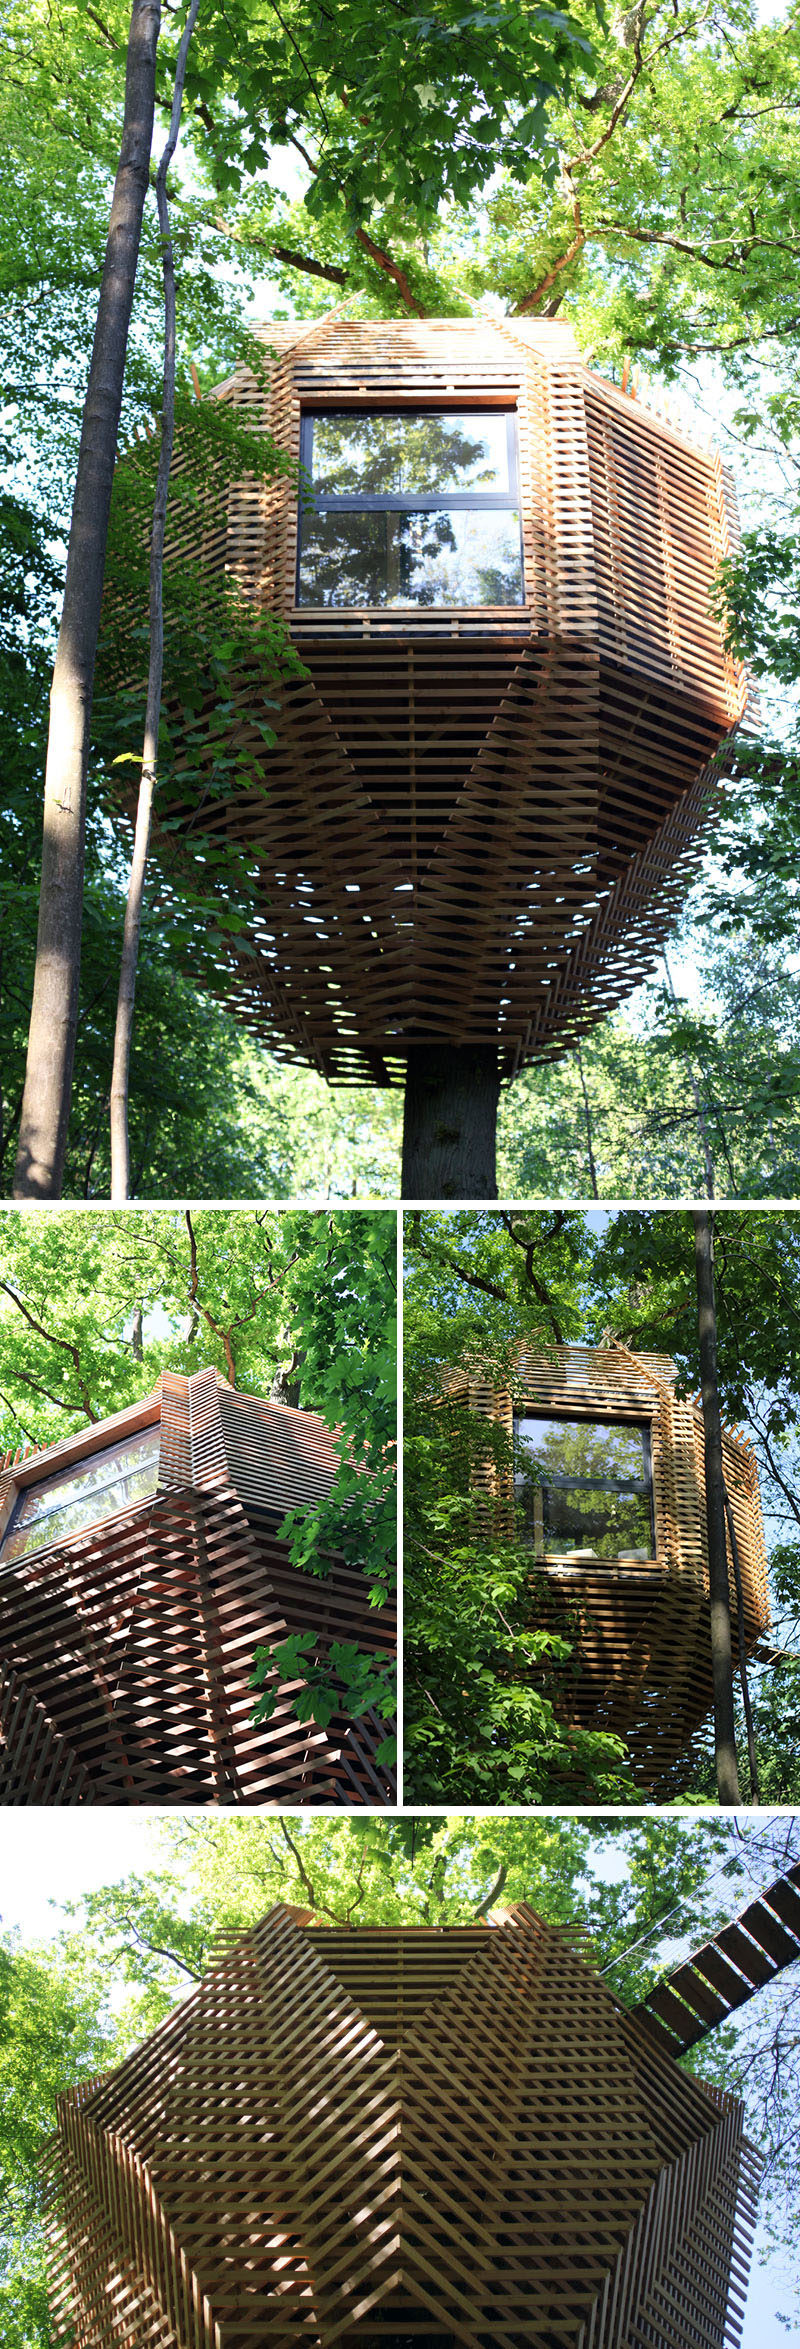 Atelier LAVIT have designed the ORIGIN Tree House for their clients in France who wanted to have a unique cabin. #ModernTreeHouse #TreeHouse #Architecture